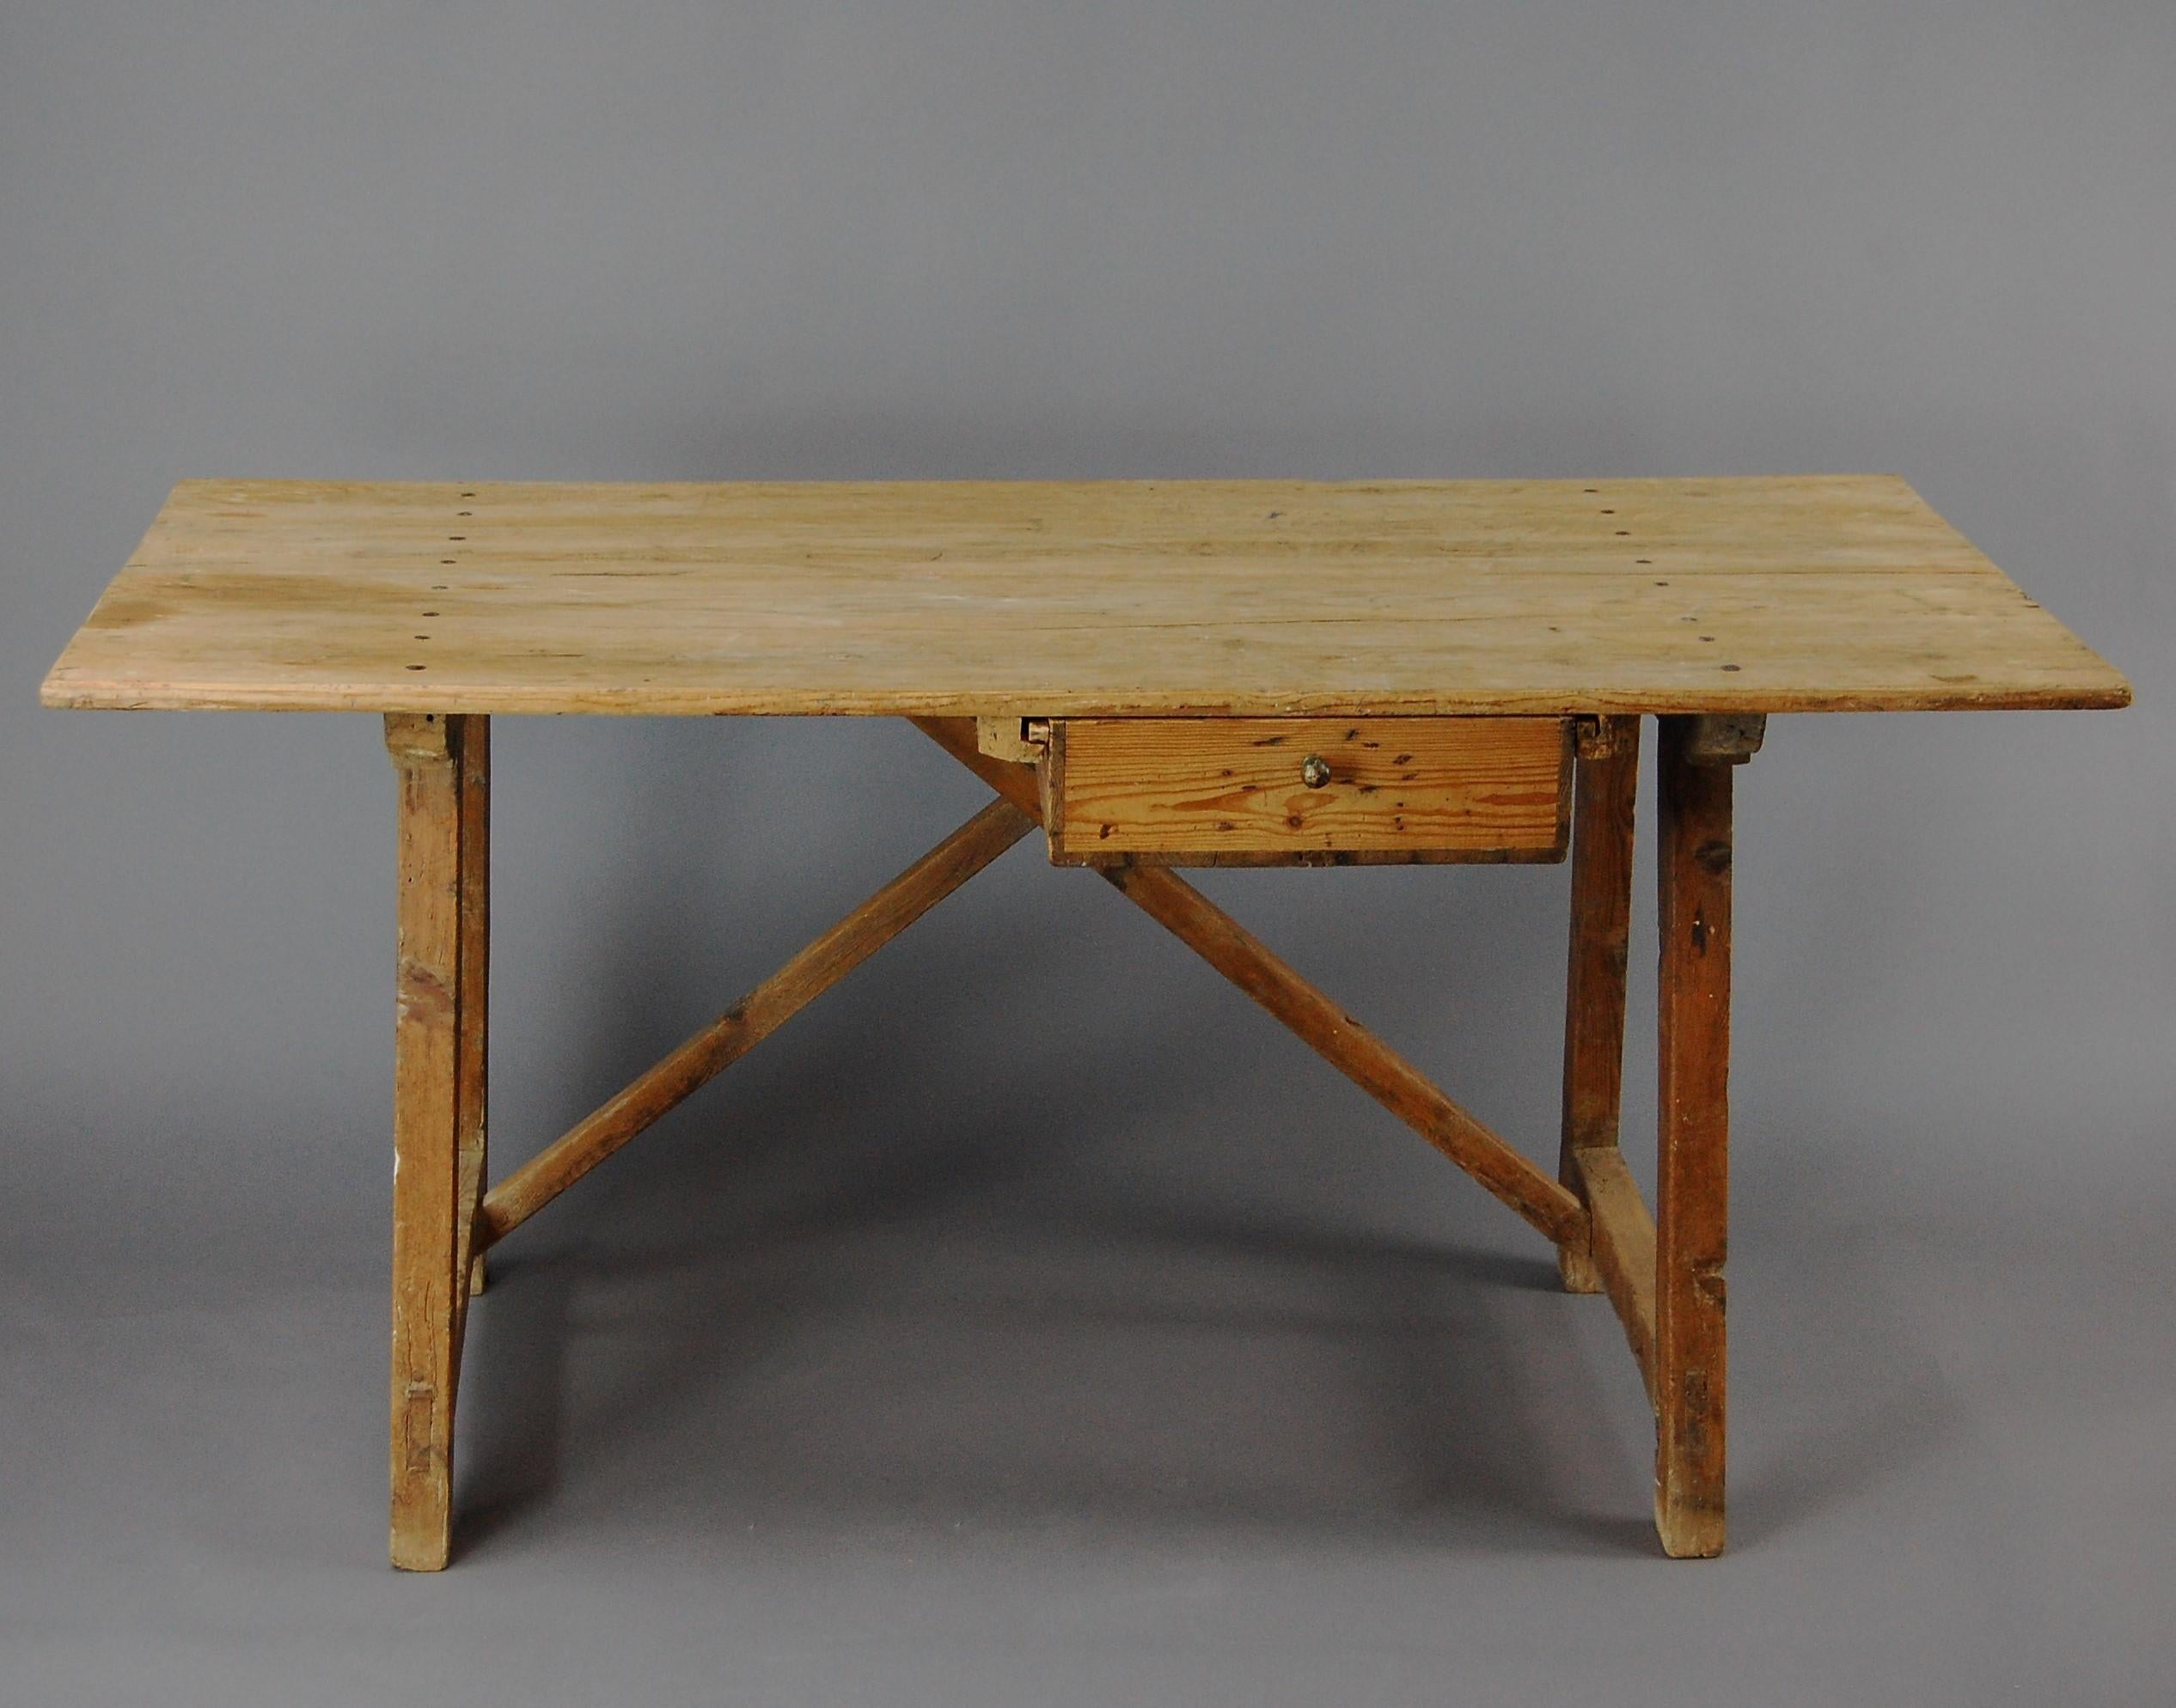 Primitive Spanish table or desk, originally used as a tailors cutting table, fabulous size for a generous office workstation, wonderful untouched dry finish and soft edges.